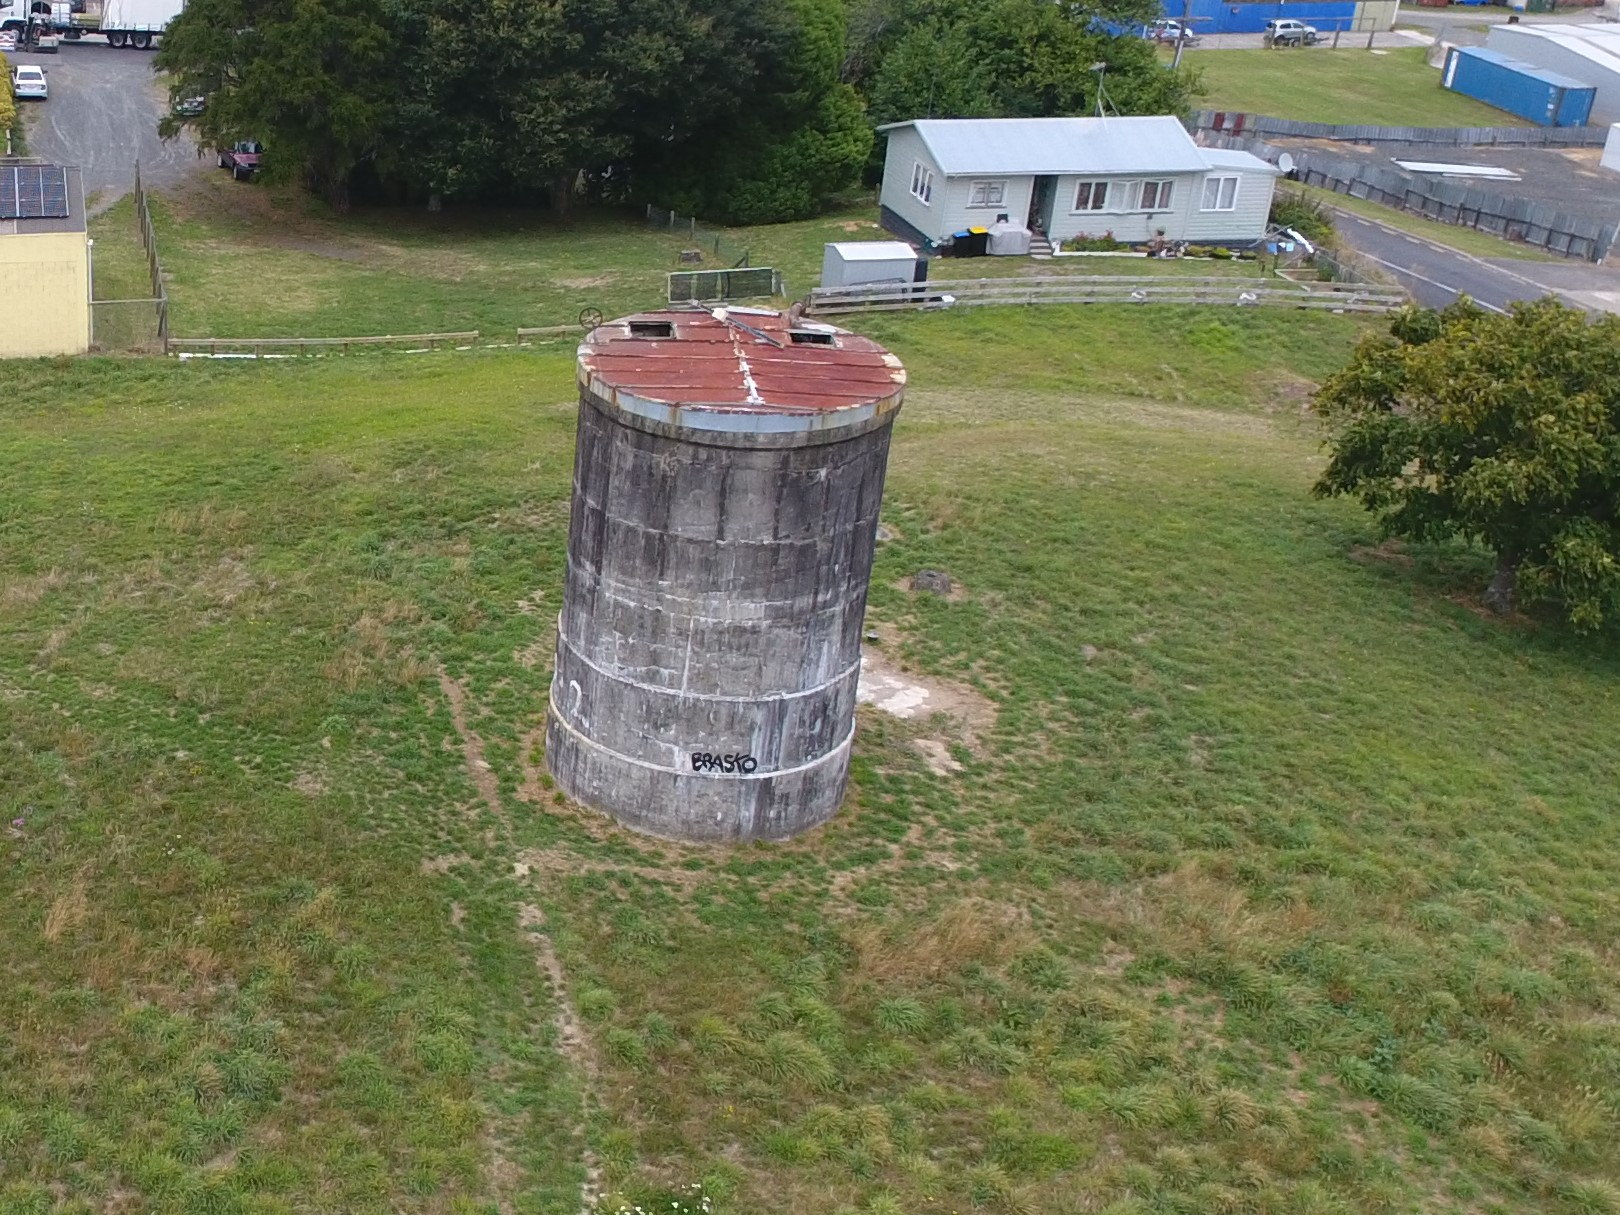 A bird’s eye view of the old water tower on the Turata Reserve in Kihikihi which will be removed this month.